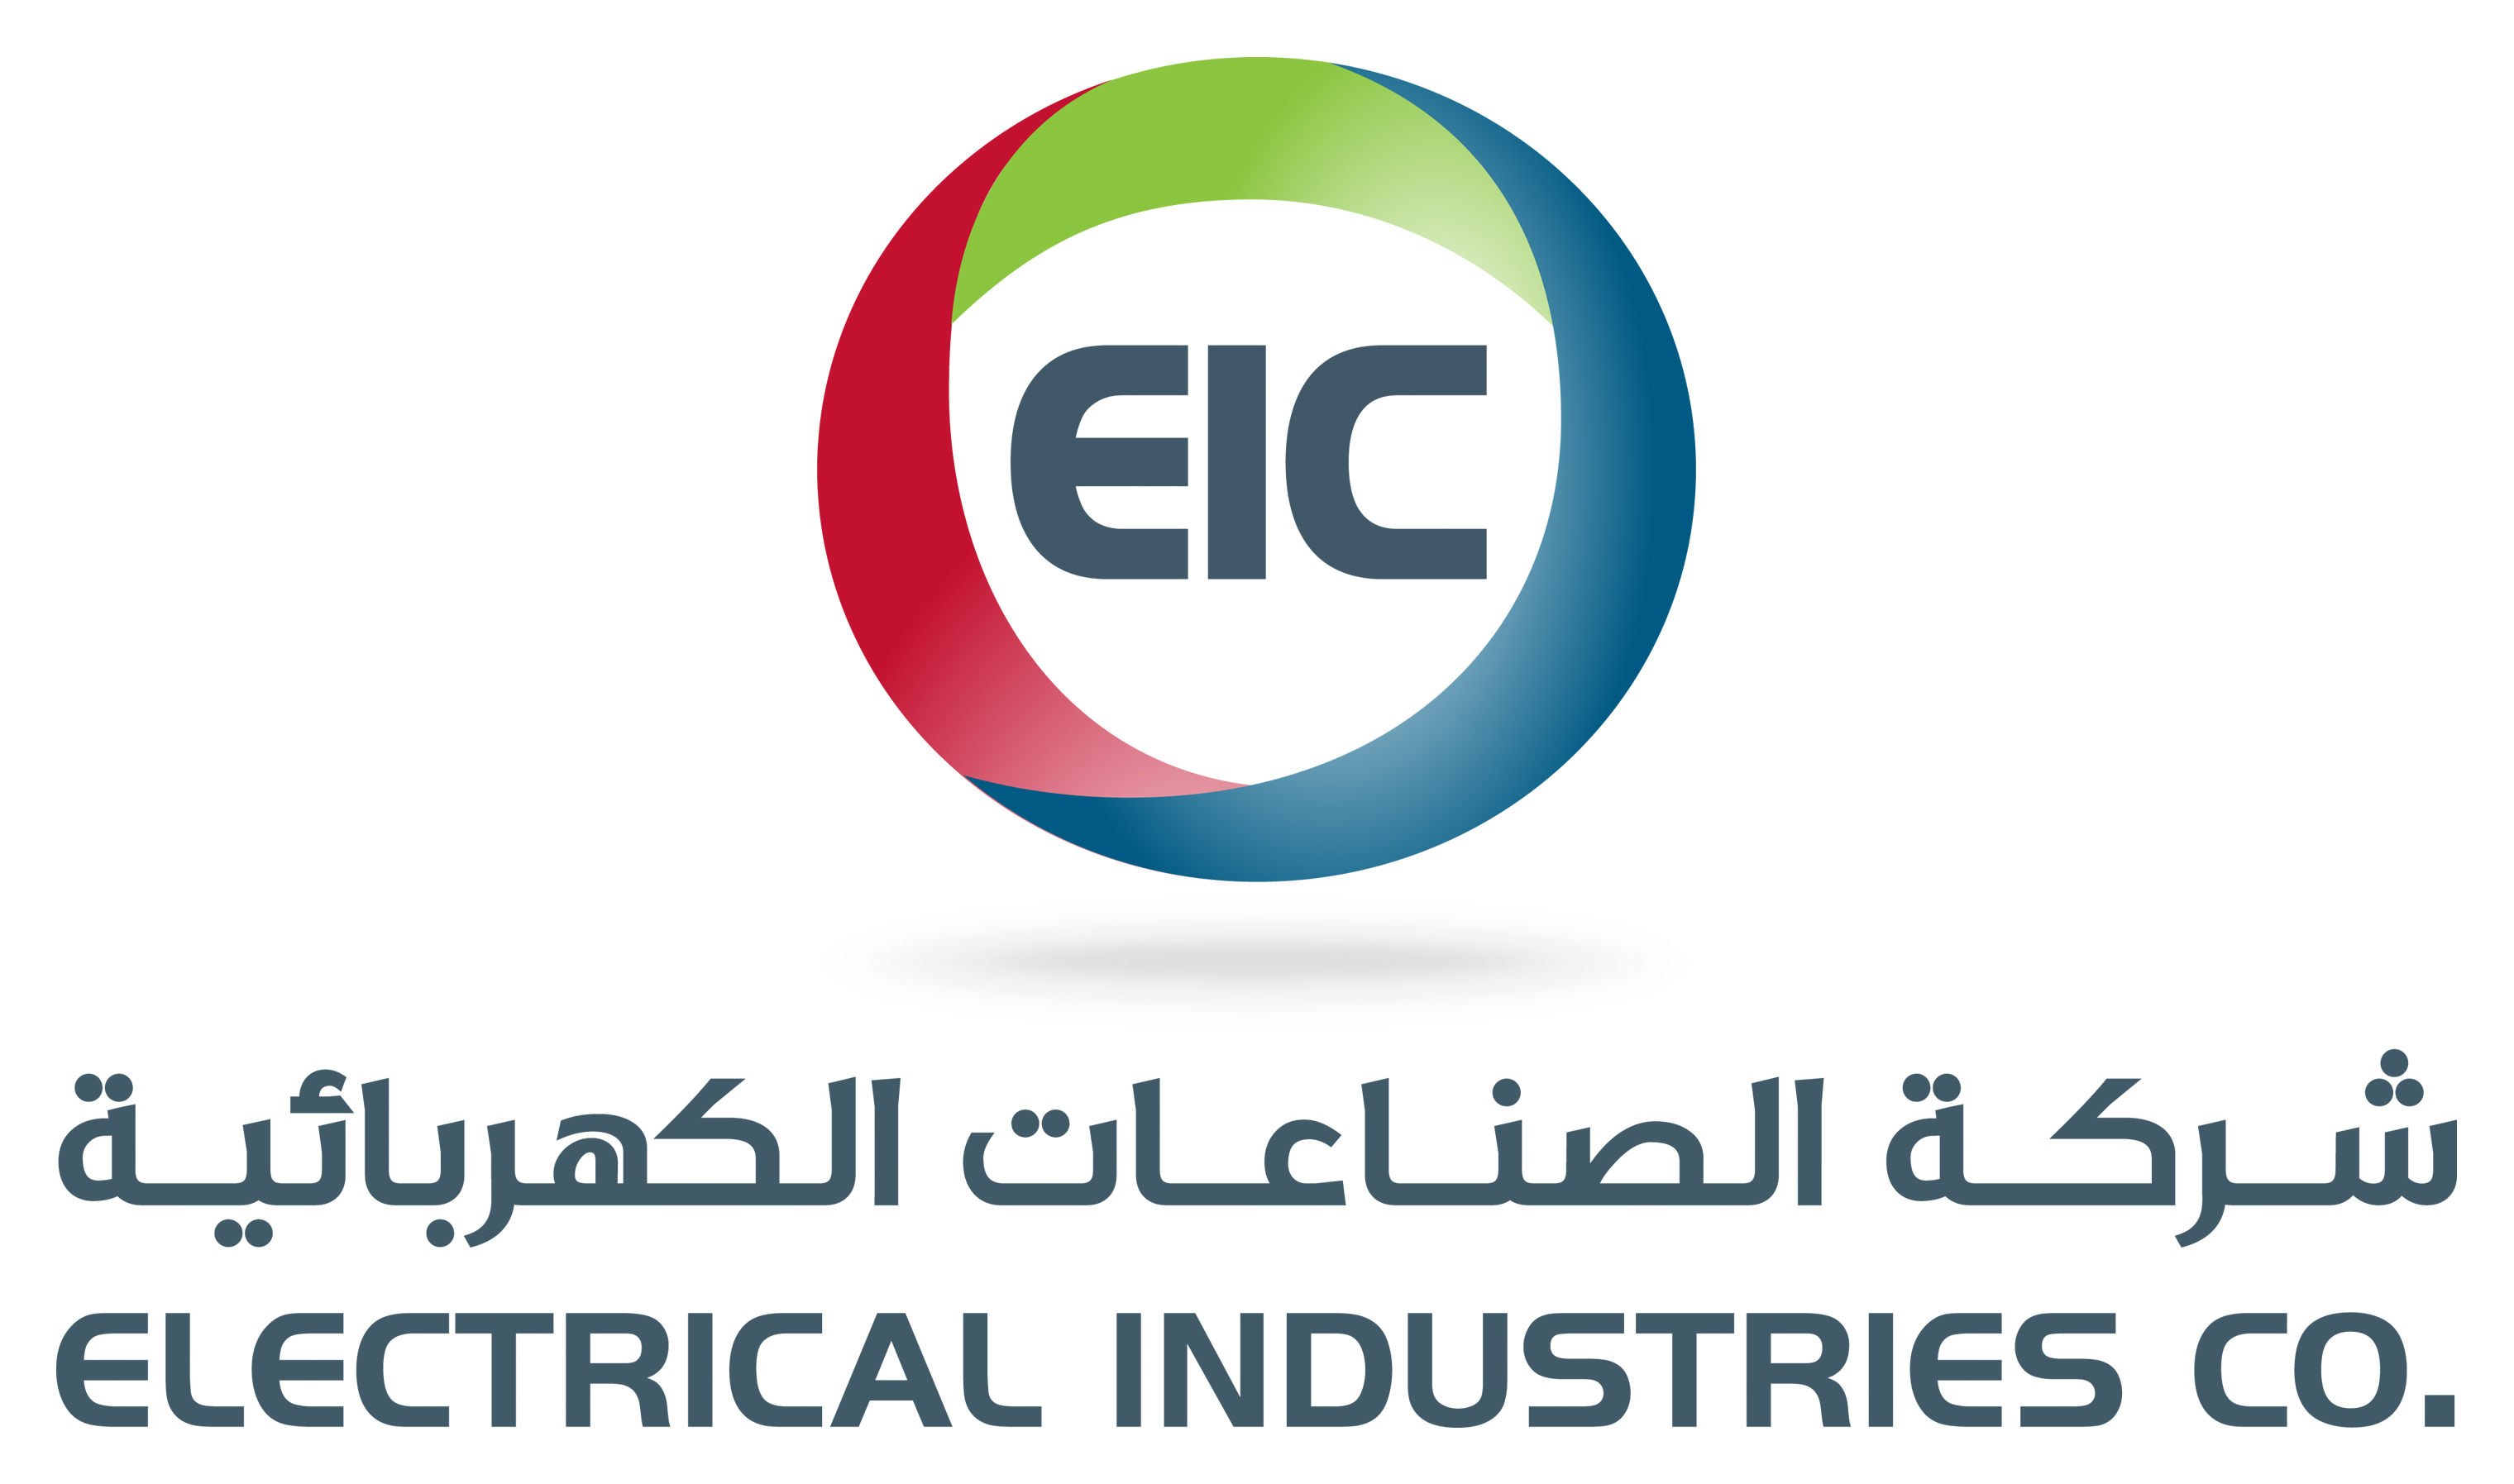 About Electrical Industries Company. Energy & Utilities